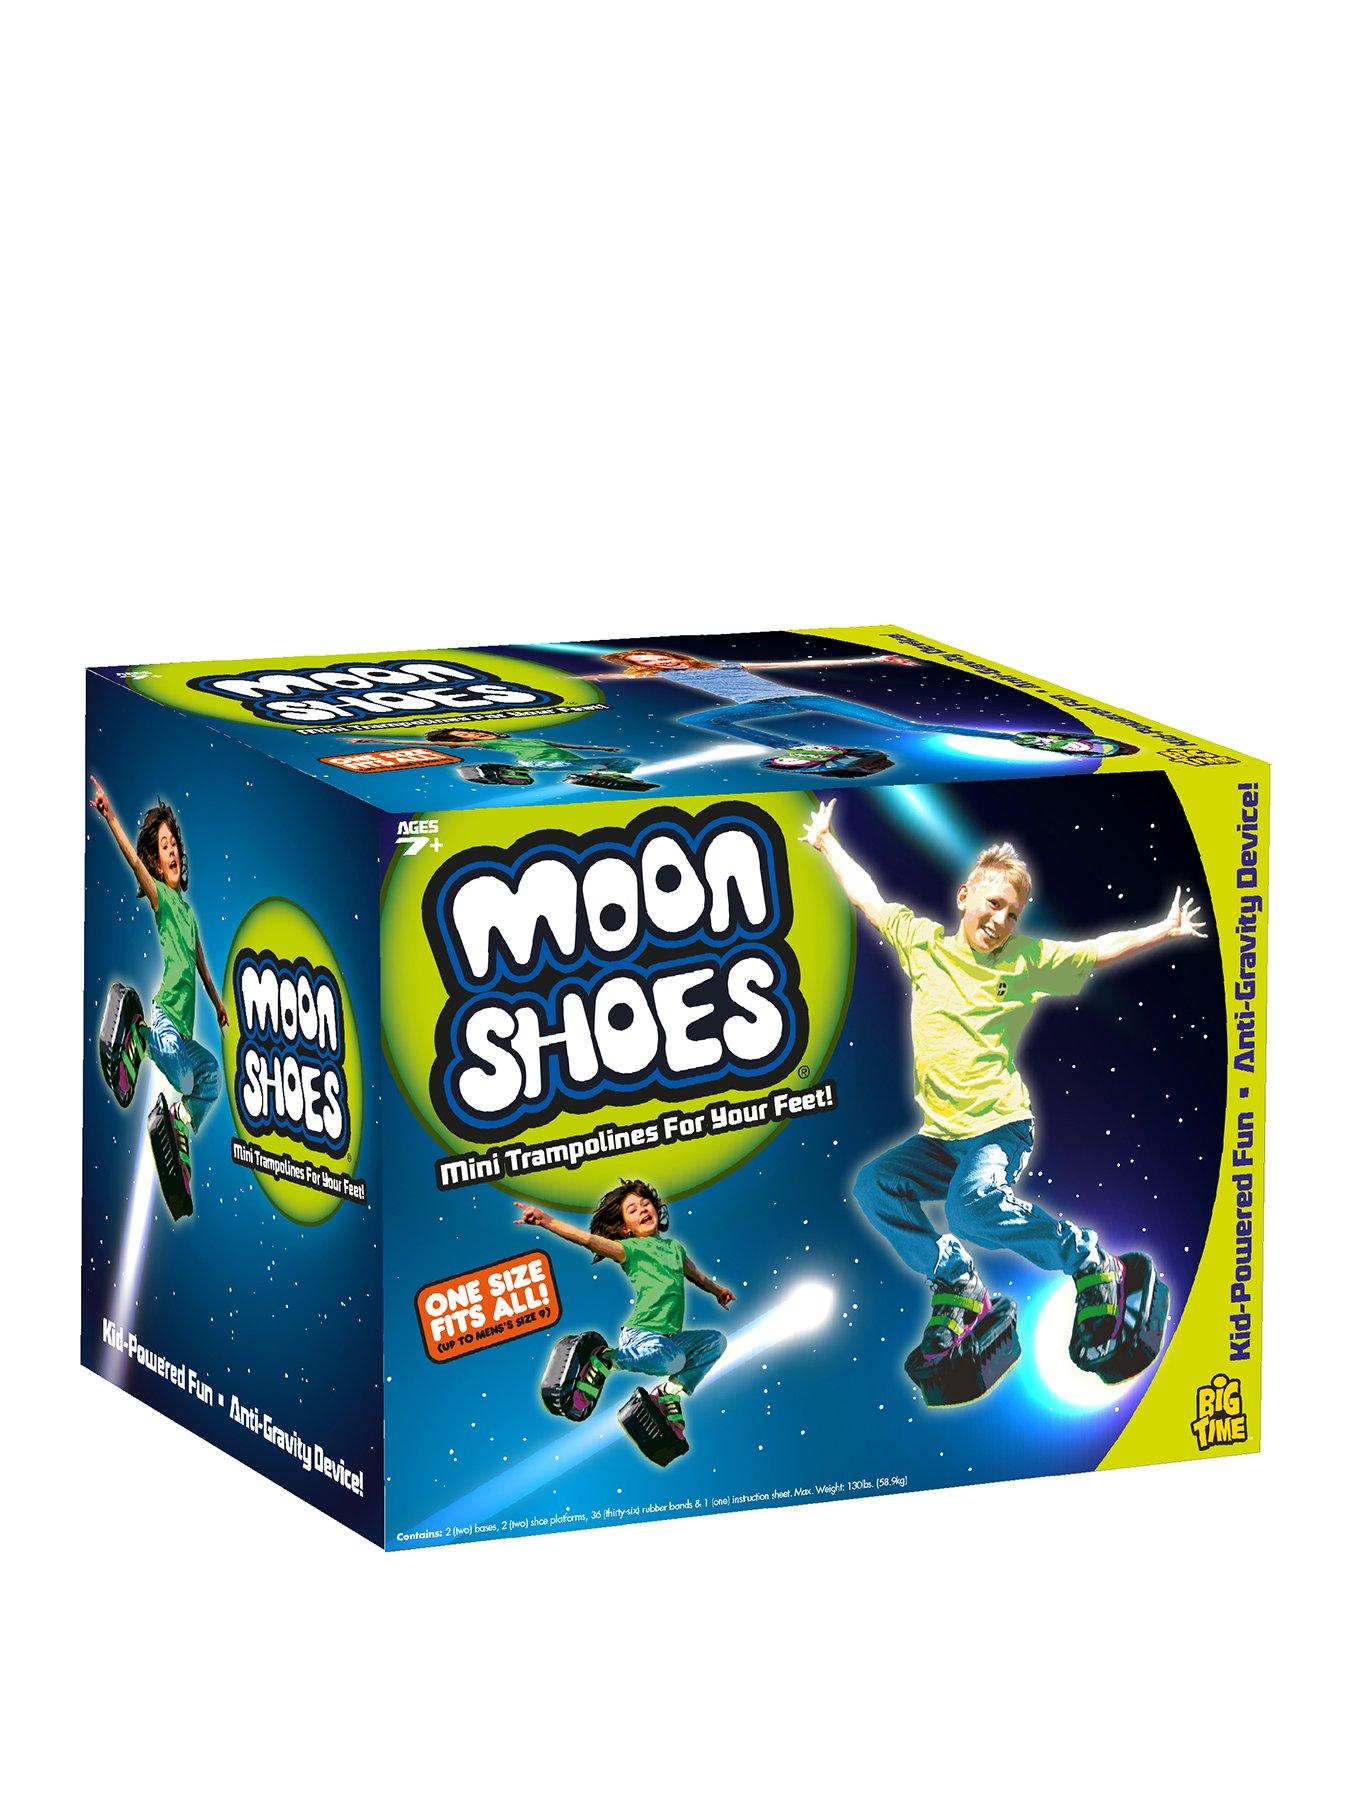 Big Time Toys Moon Shoes Mini Trampolines For your Feet 1 one size